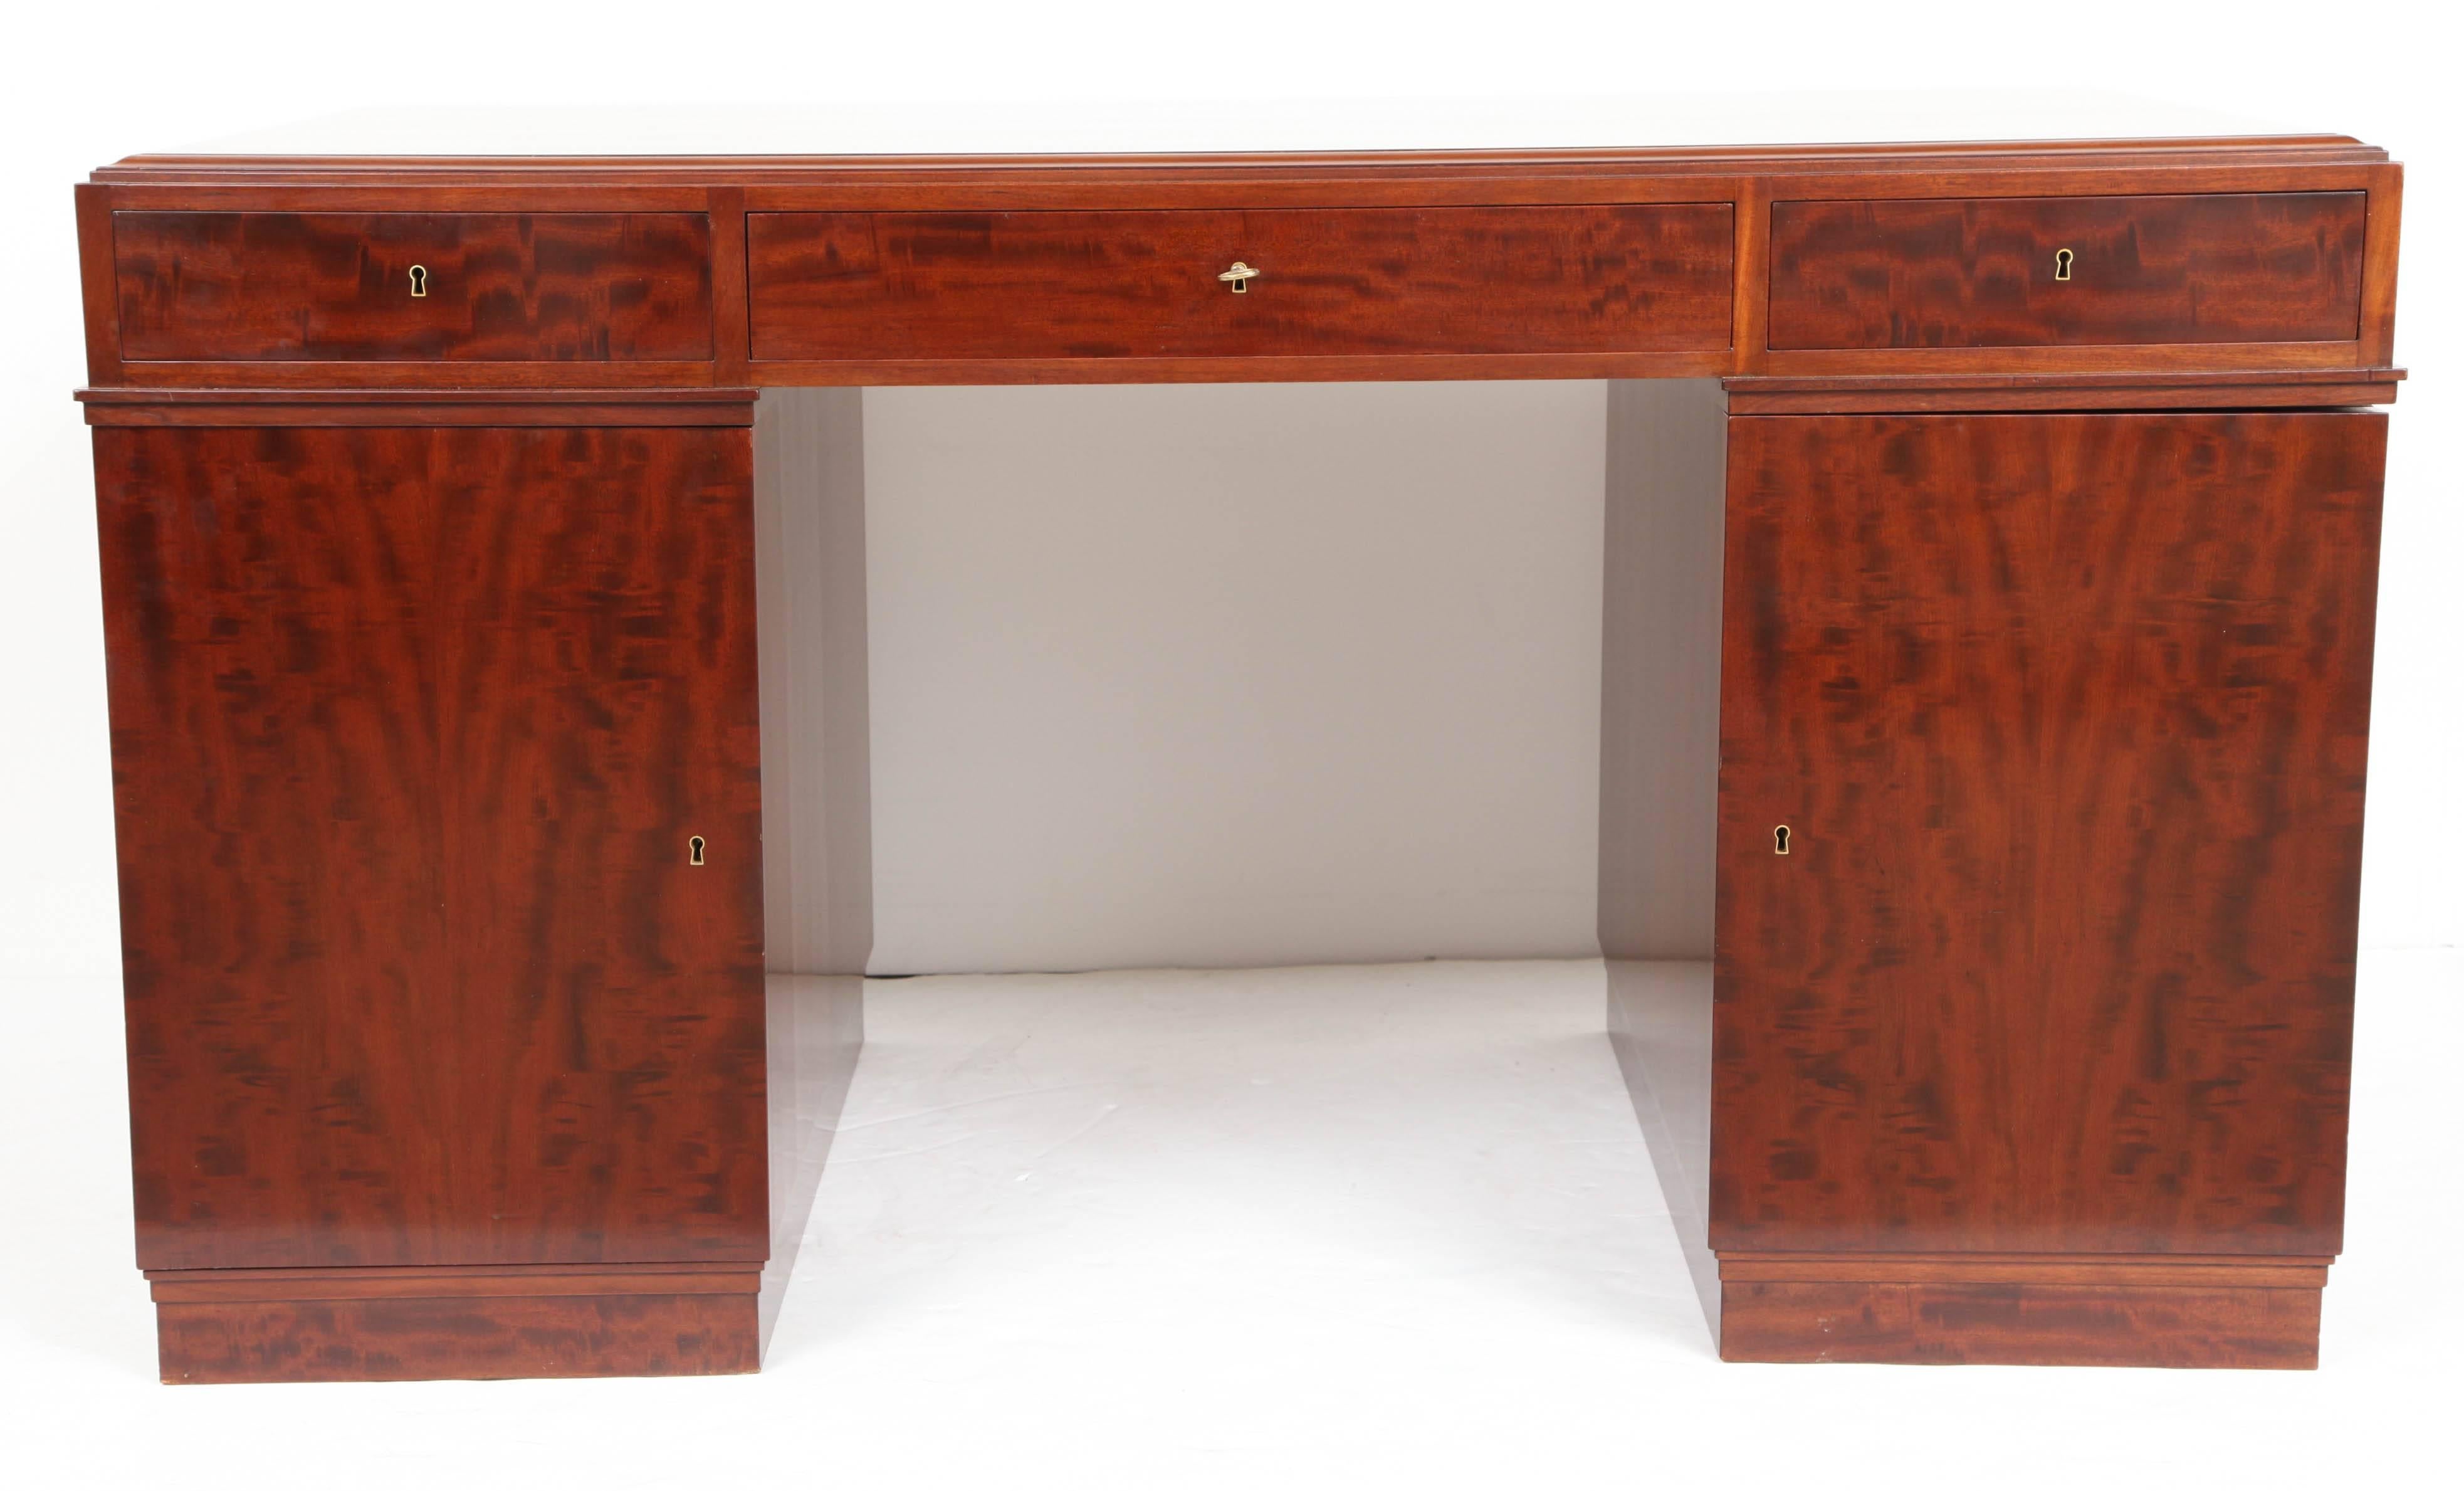 A Danish well-figured mahogany pedestal desk by Frits Henningsen, Circa 1930-40, the rectangular top with ovolo profile edge above a frieze with three drawers, flanked by pedestals, one with shelves, one with drawers, raised on a plinth base. 